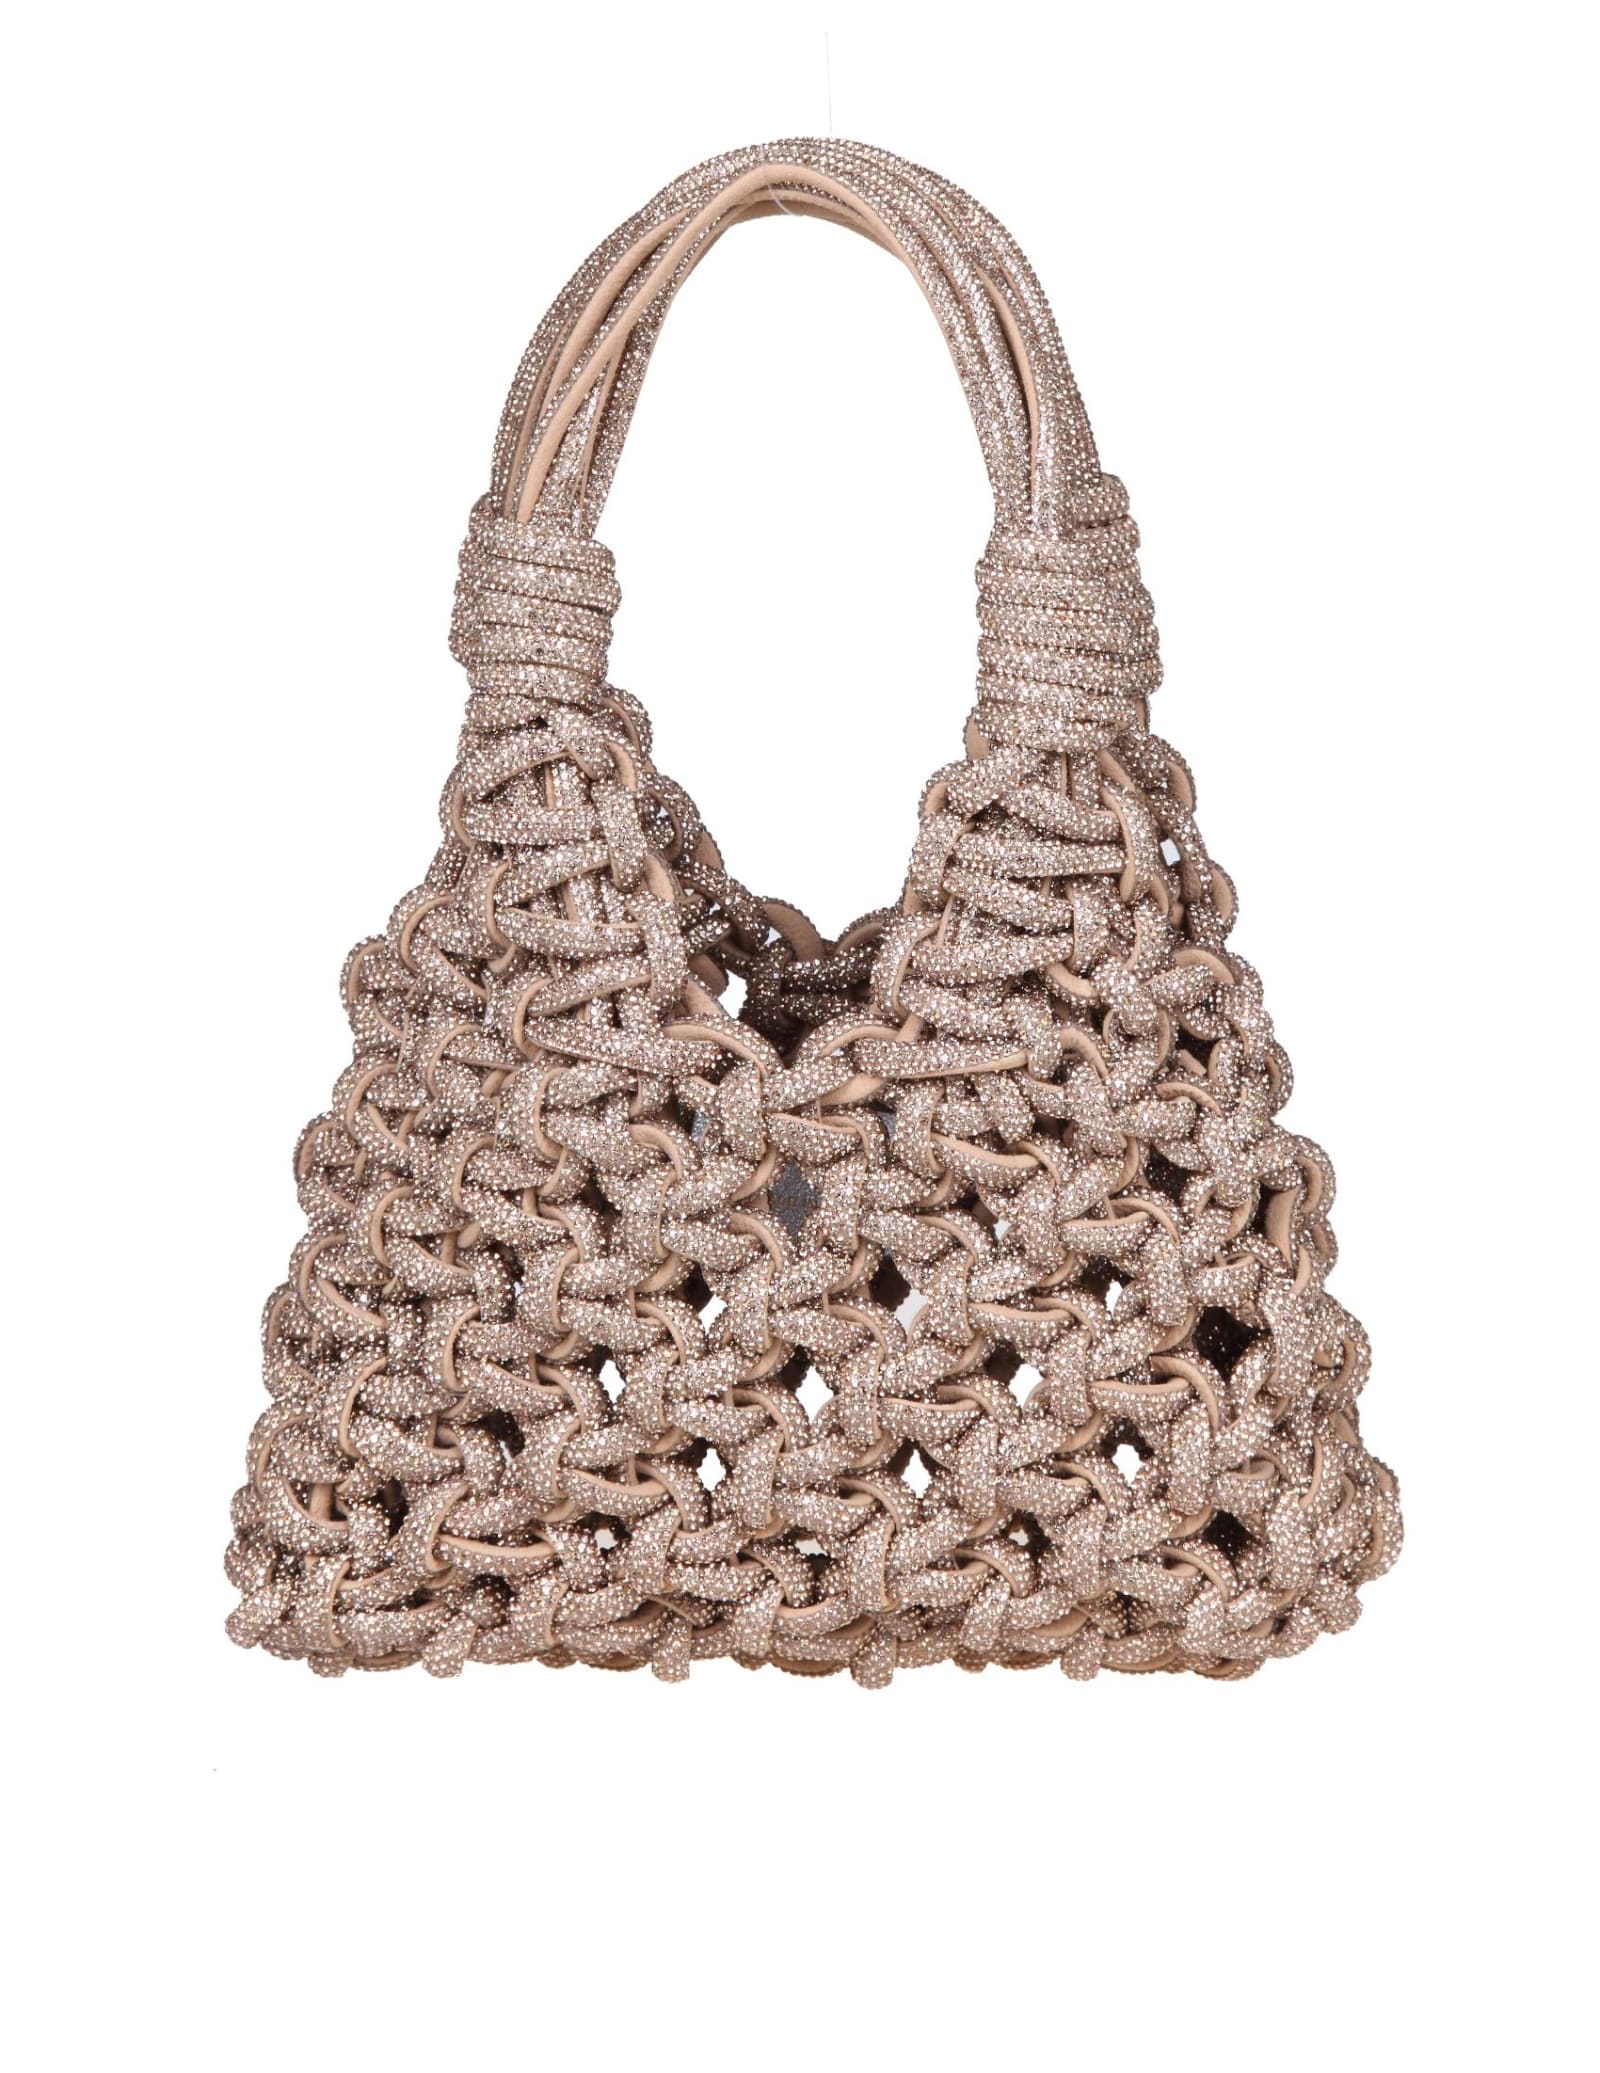 Shop Hibourama Jewel Bag With Weaving And Applied Crystals In Topaz